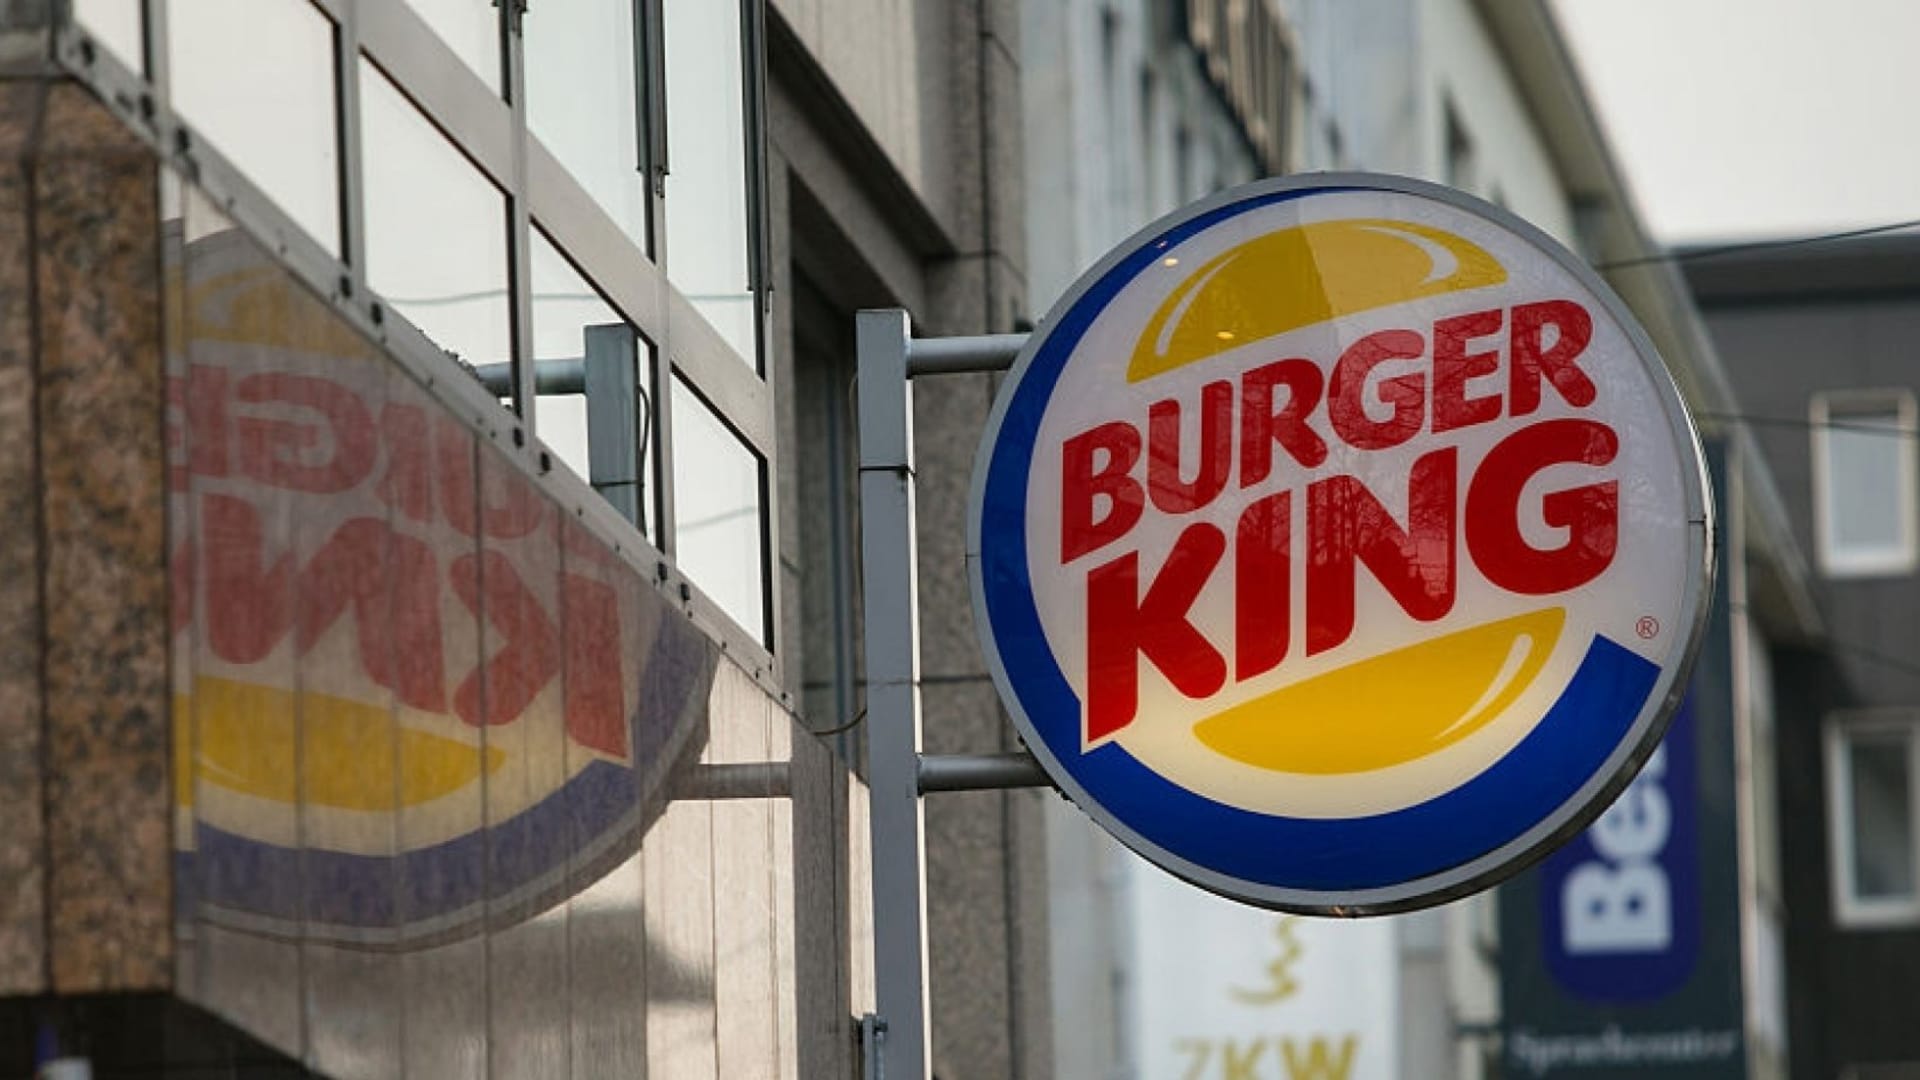 Burger King Just Made a Shocking Plea to Customers to Order From McDonald's. No, It's Not a Joke